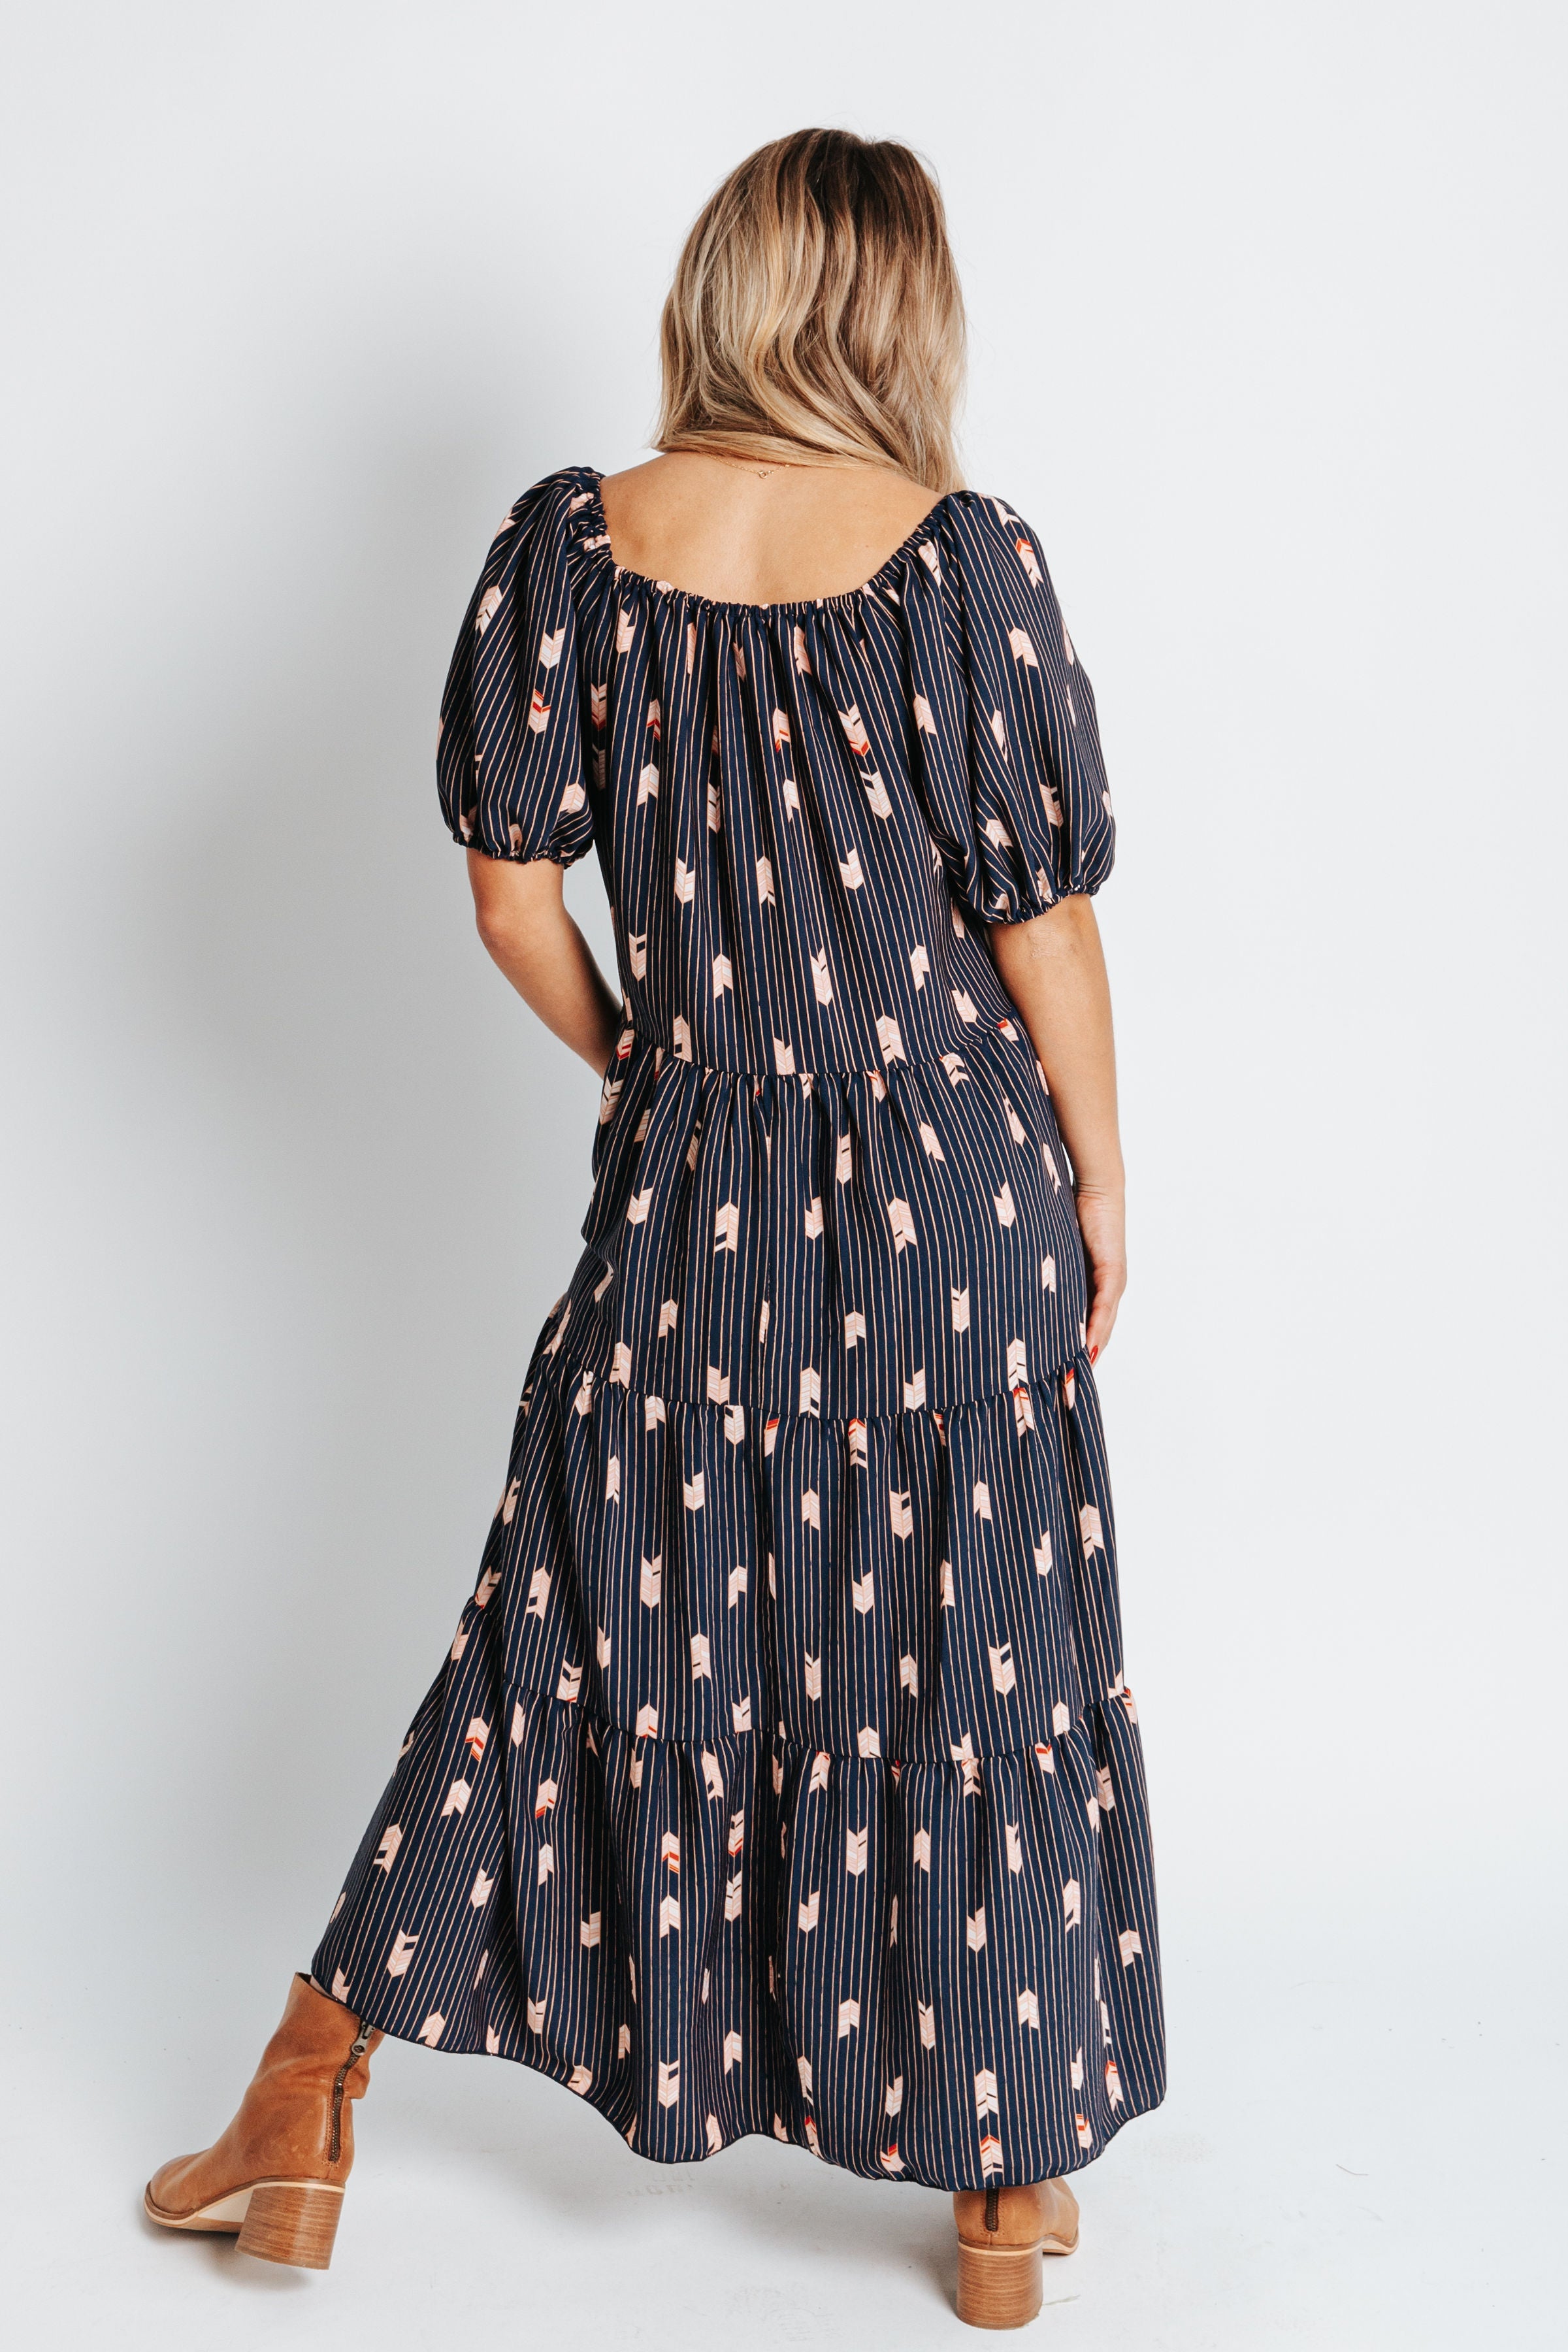 The Sherry Patterned Maxi Dress in Navy